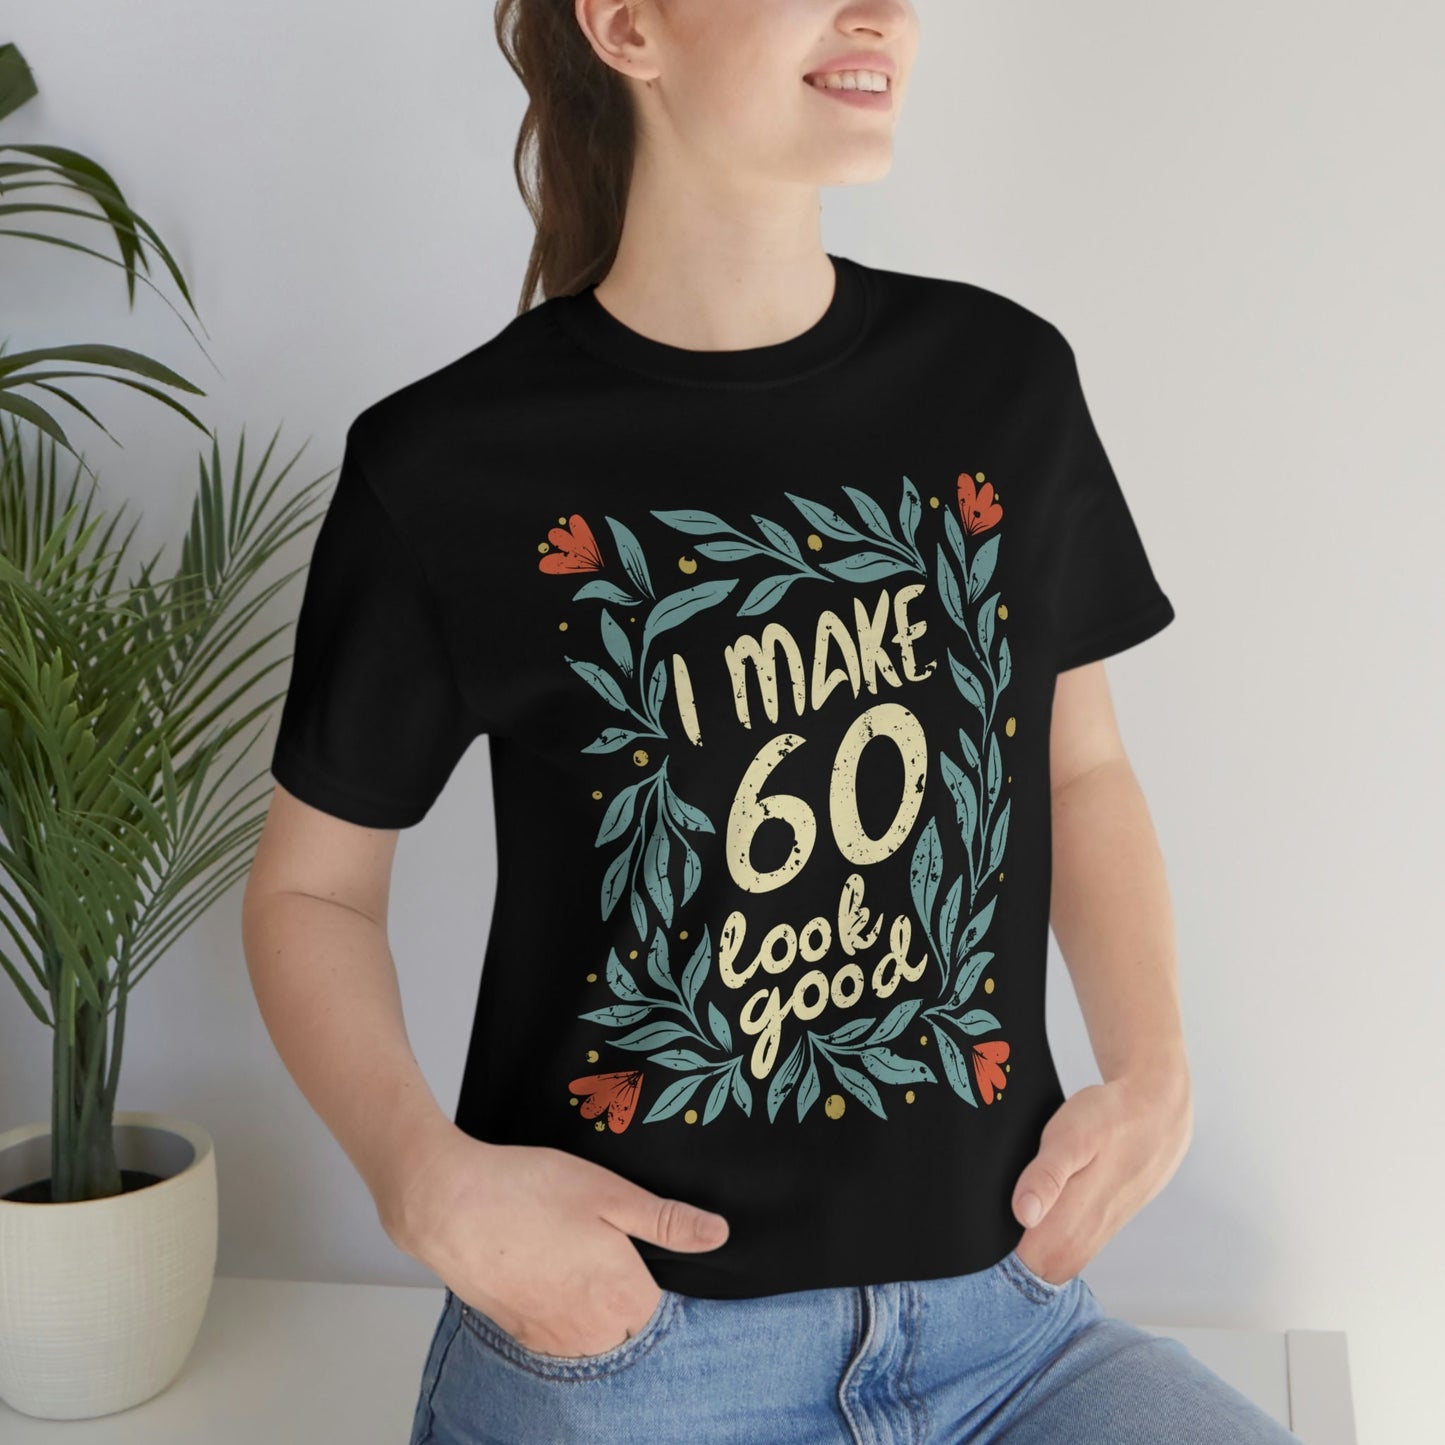 I Make 60 Look Good gift t-shirt for woman or wife, 60 Anniversary t-shirt